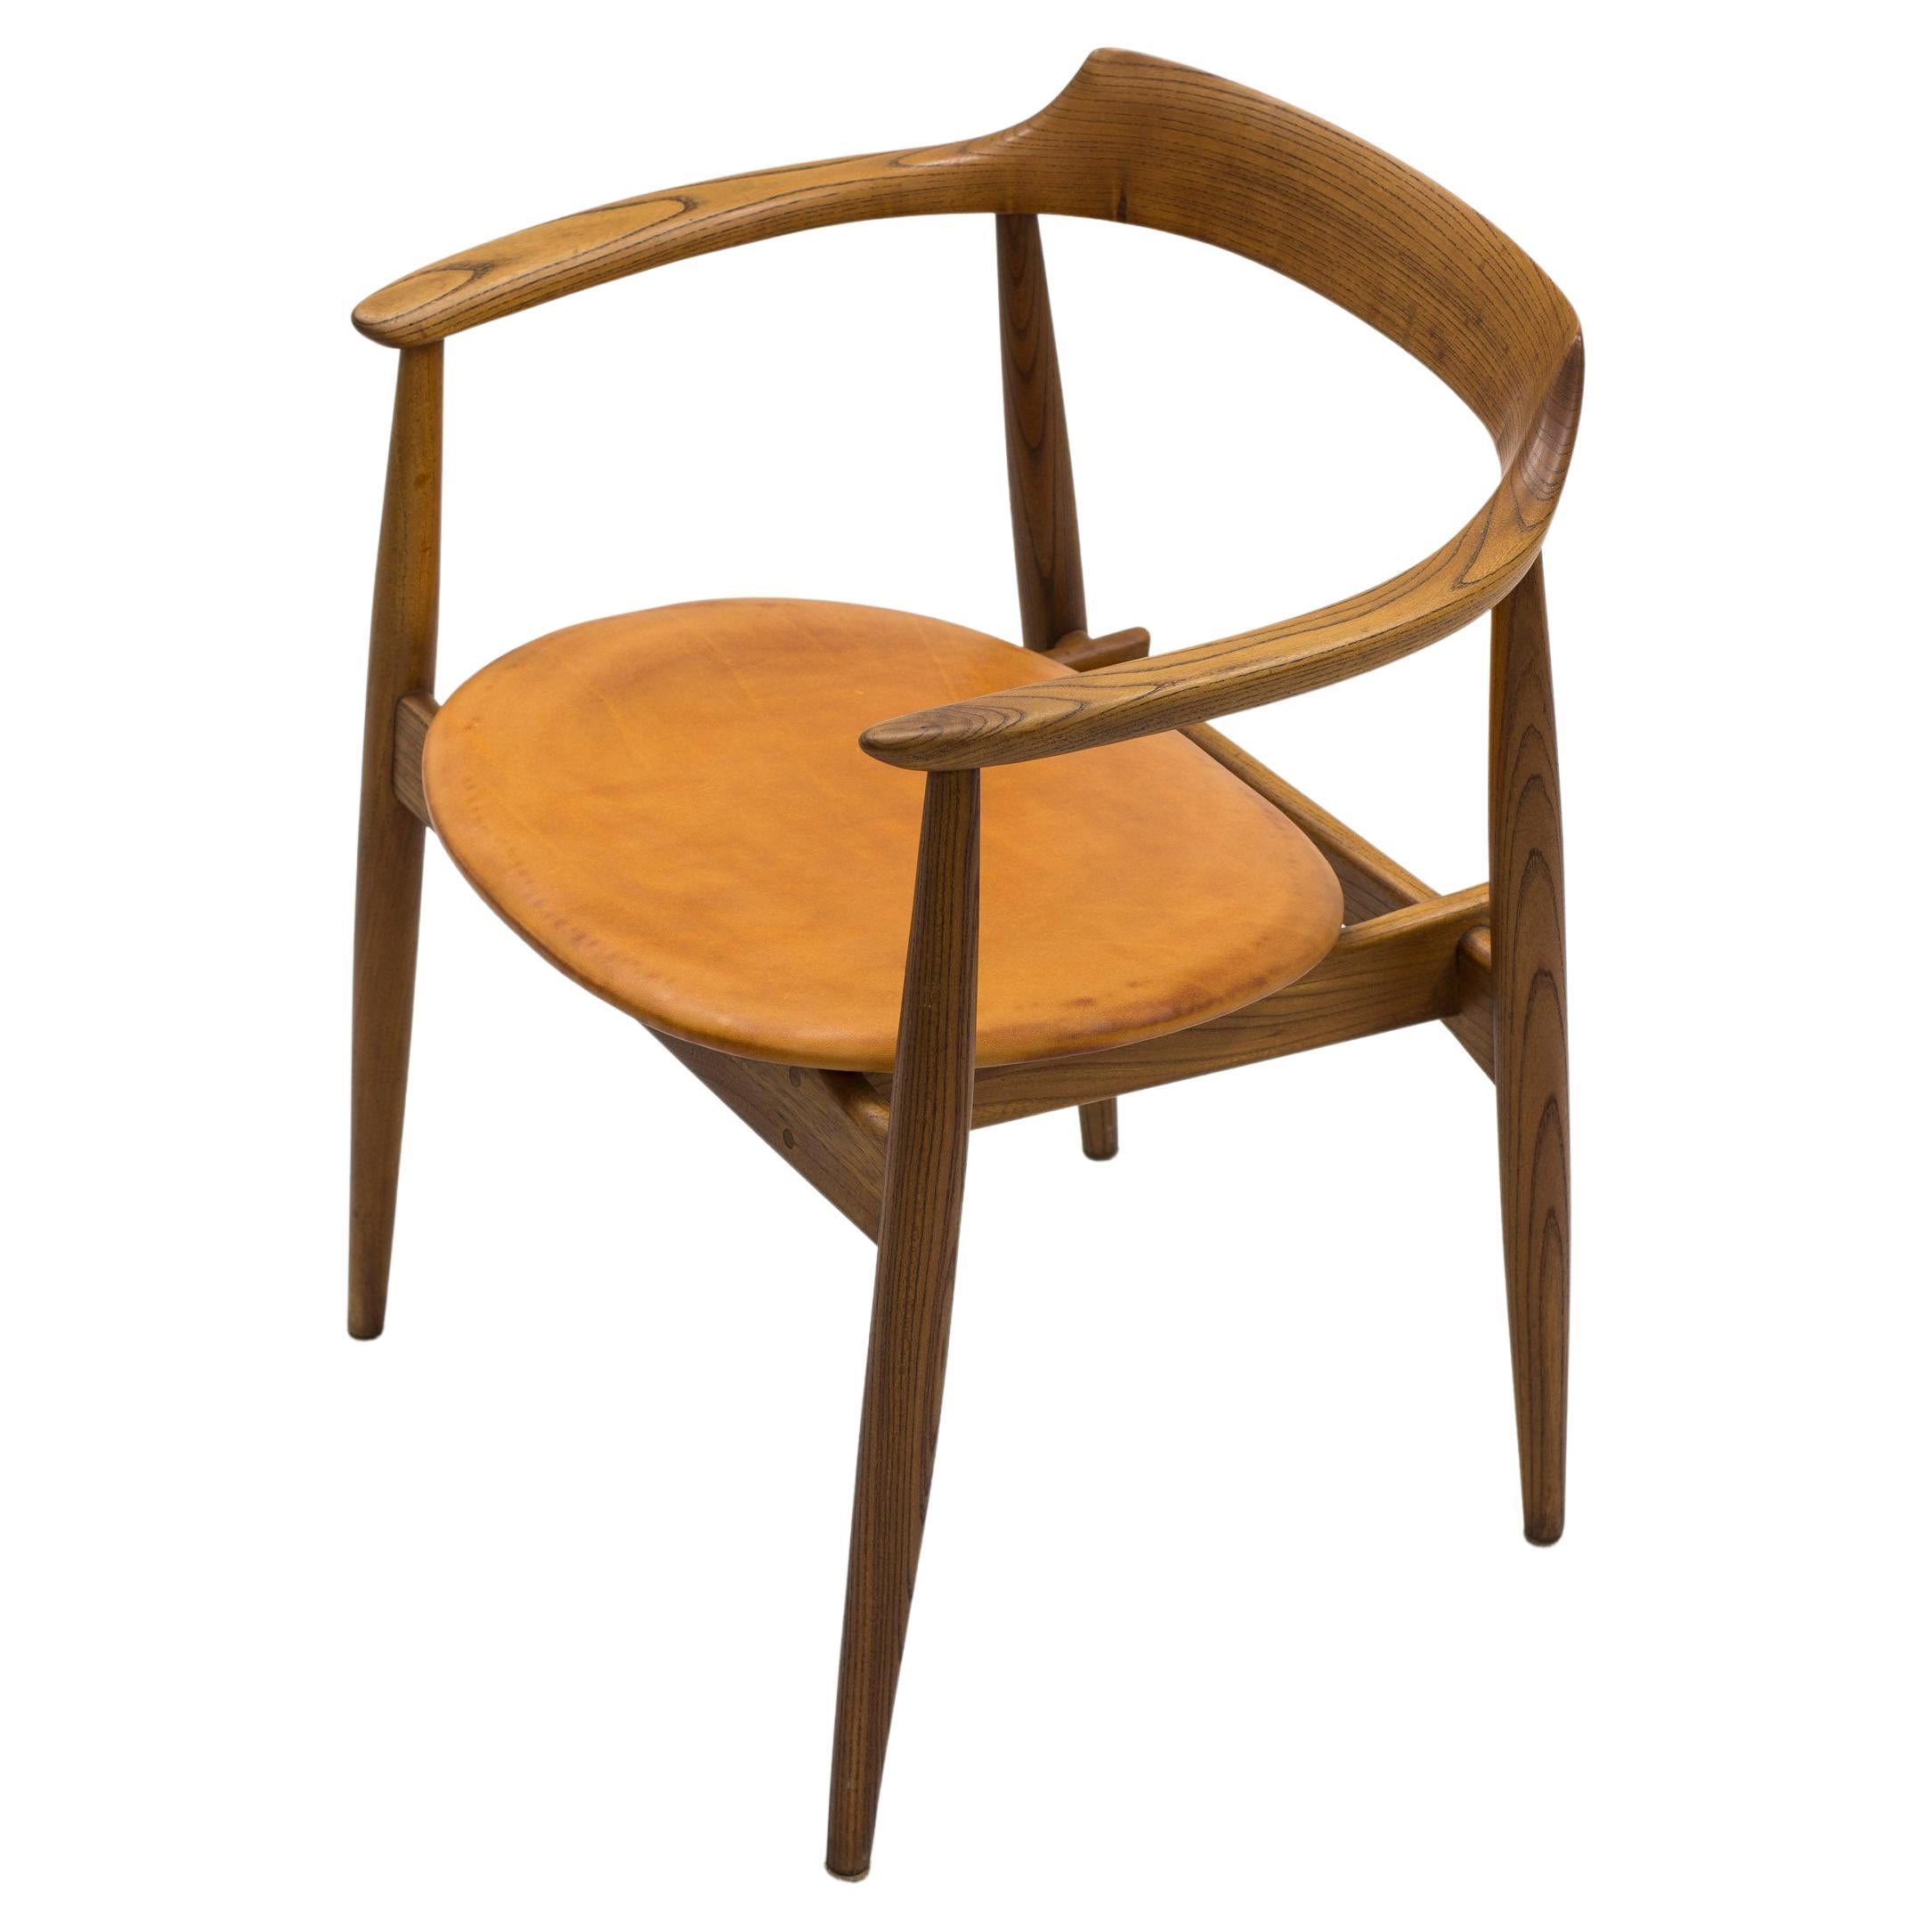 Arm chair in elm and leather with exquisite patina by Arne Wahl Iversen, 1960s